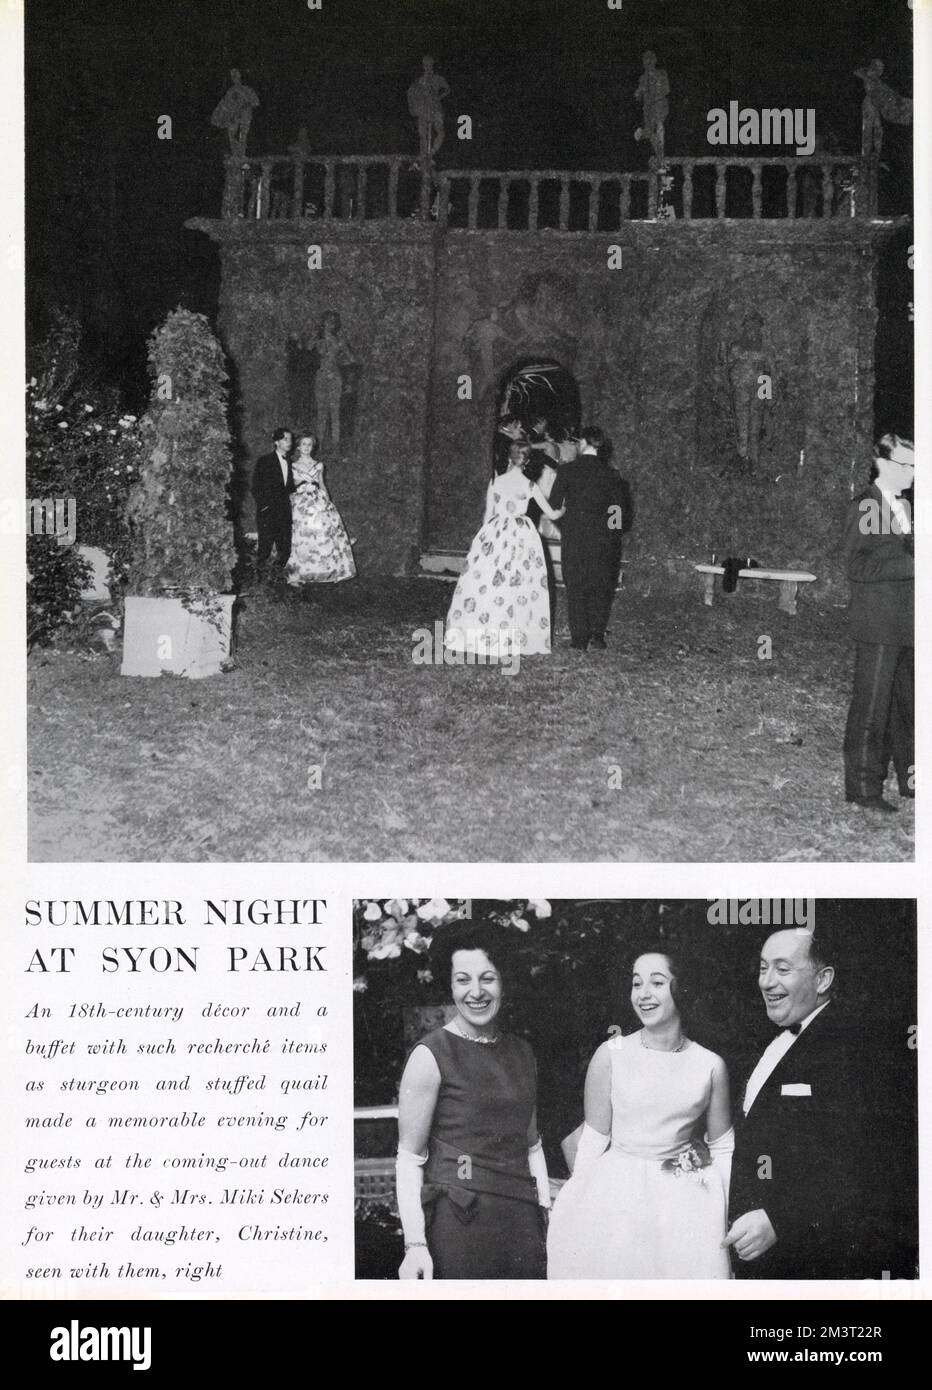 Page from The Tatler reporting on the coming out dance of Christine Sekers, daughter of Miki Sekers. The event was held at Syon Park where a 'nightclub' was created by with moss-covered castellated walls. Stock Photo